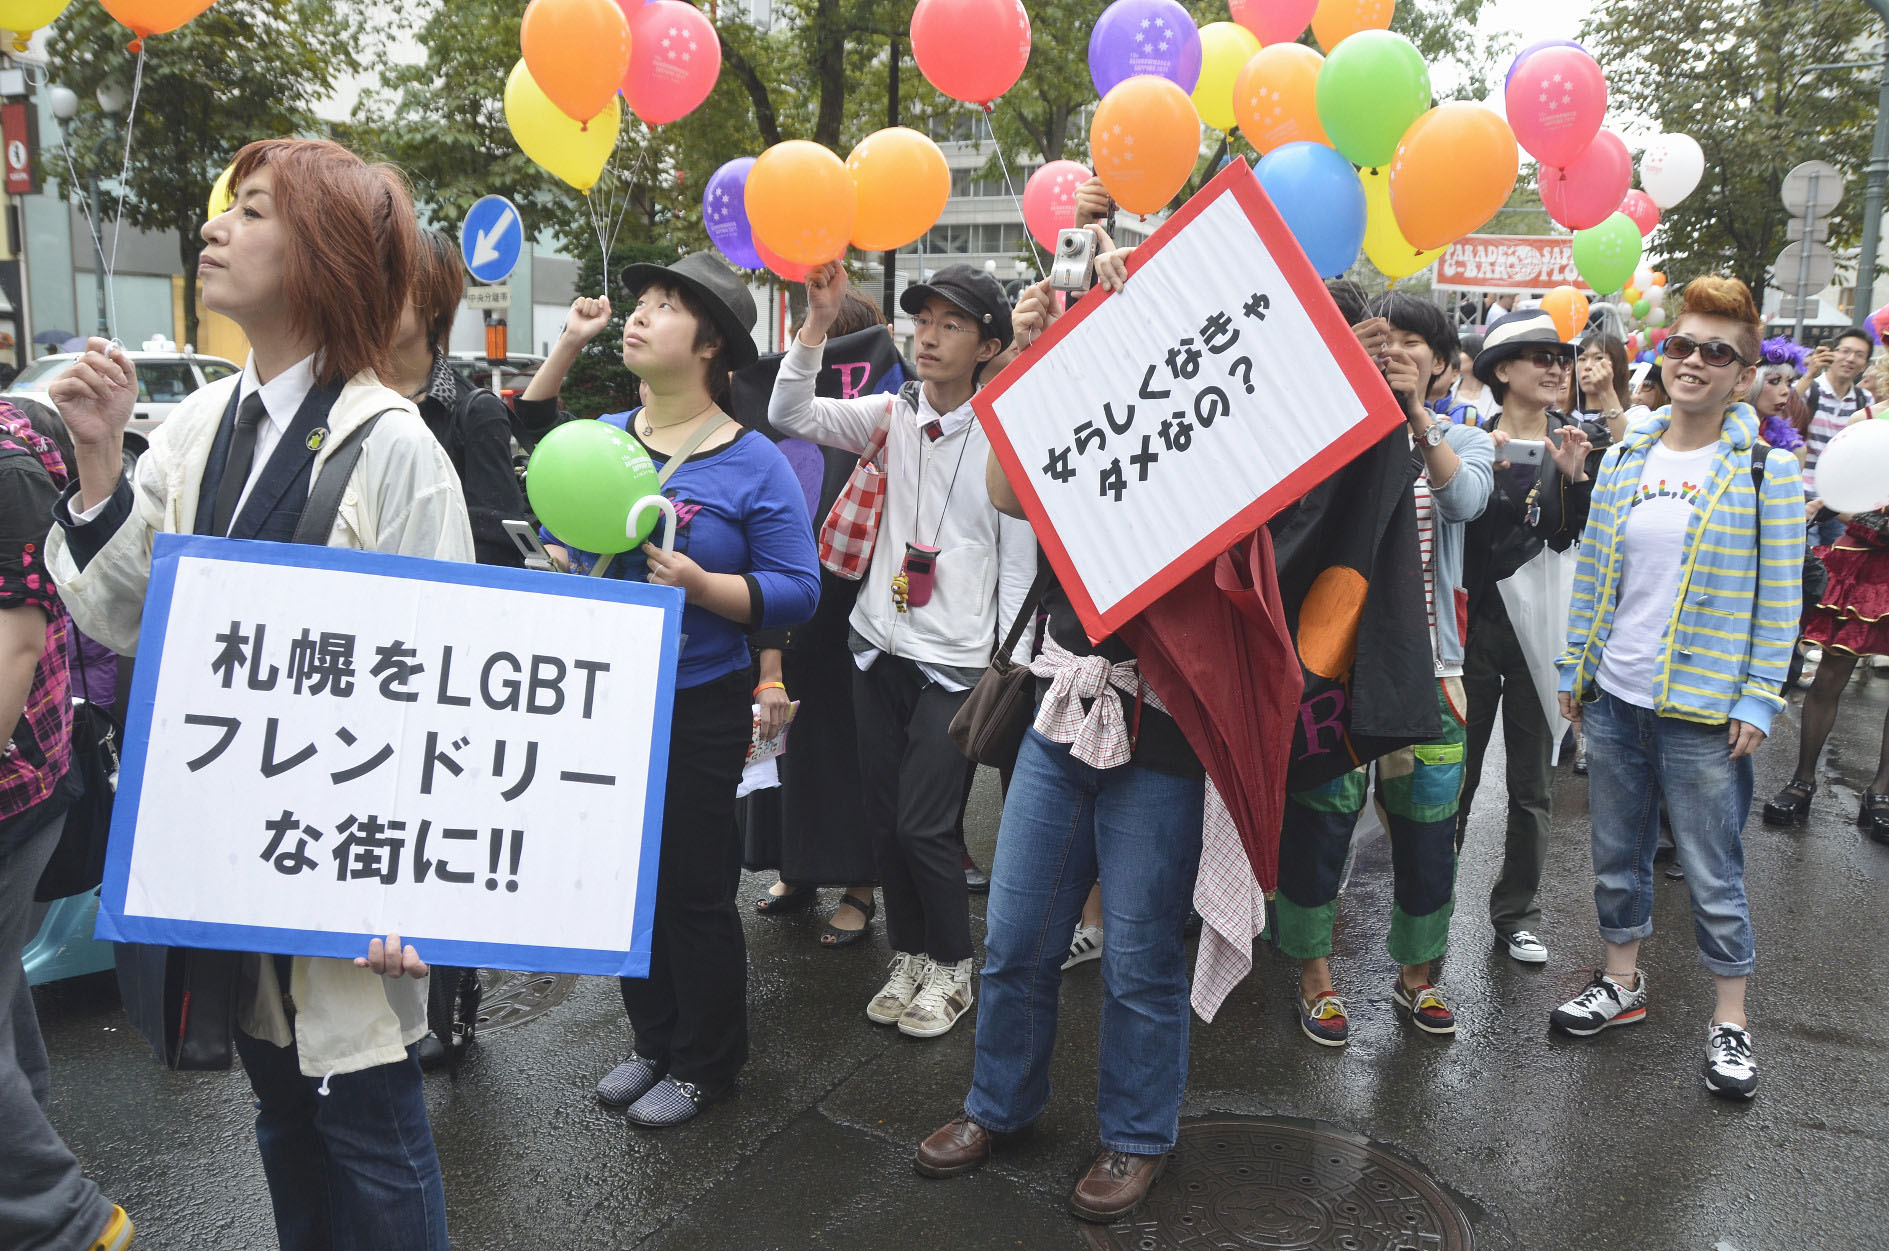 Medias Gender Roles Push Lgbt Groups Into Corners The Japan Times